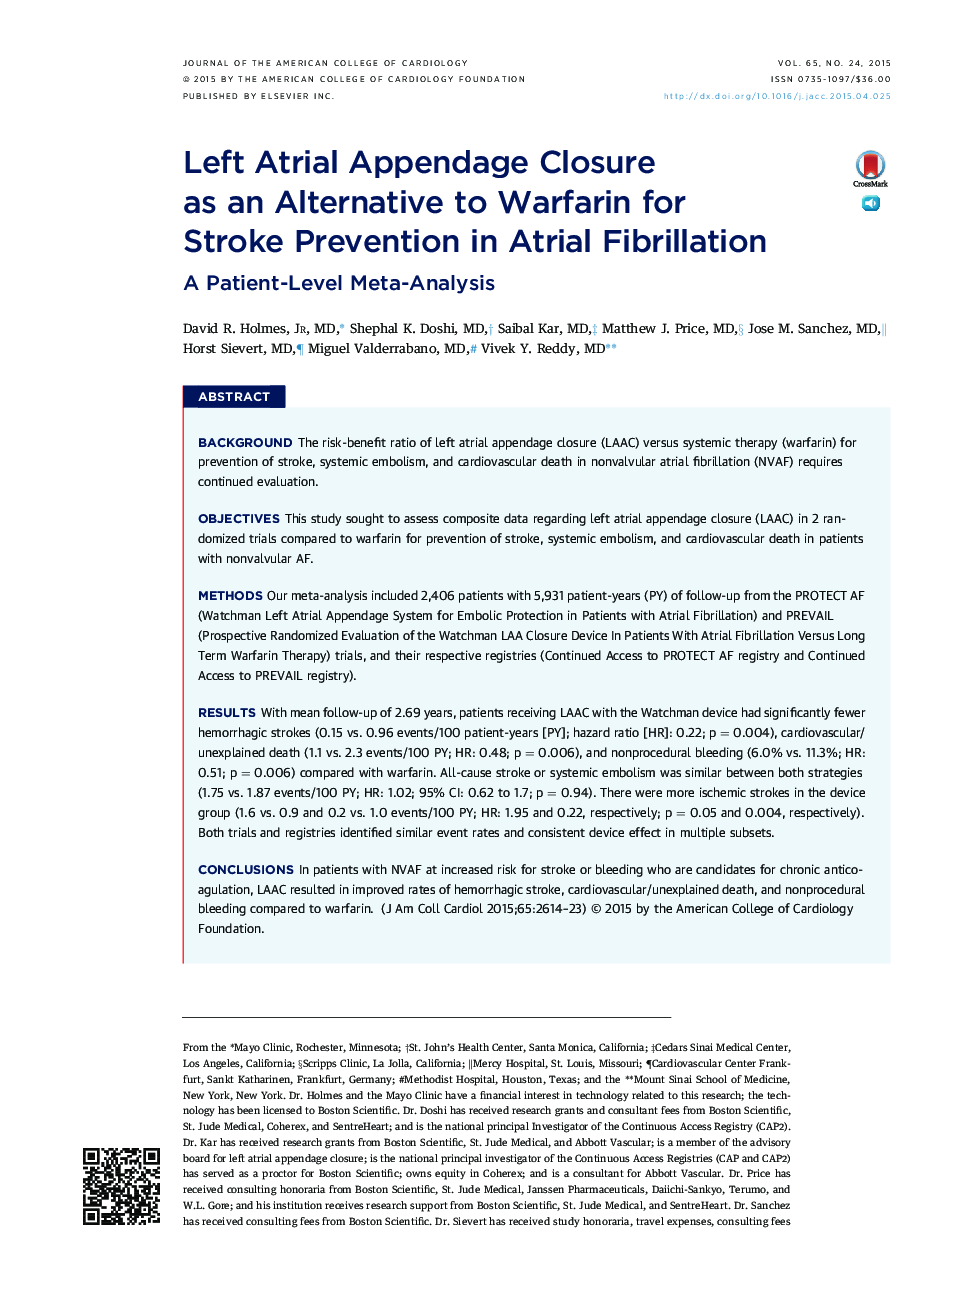 Left Atrial Appendage Closure as an Alternative to Warfarin for Stroke Prevention in Atrial Fibrillation: A Patient-Level Meta-Analysis